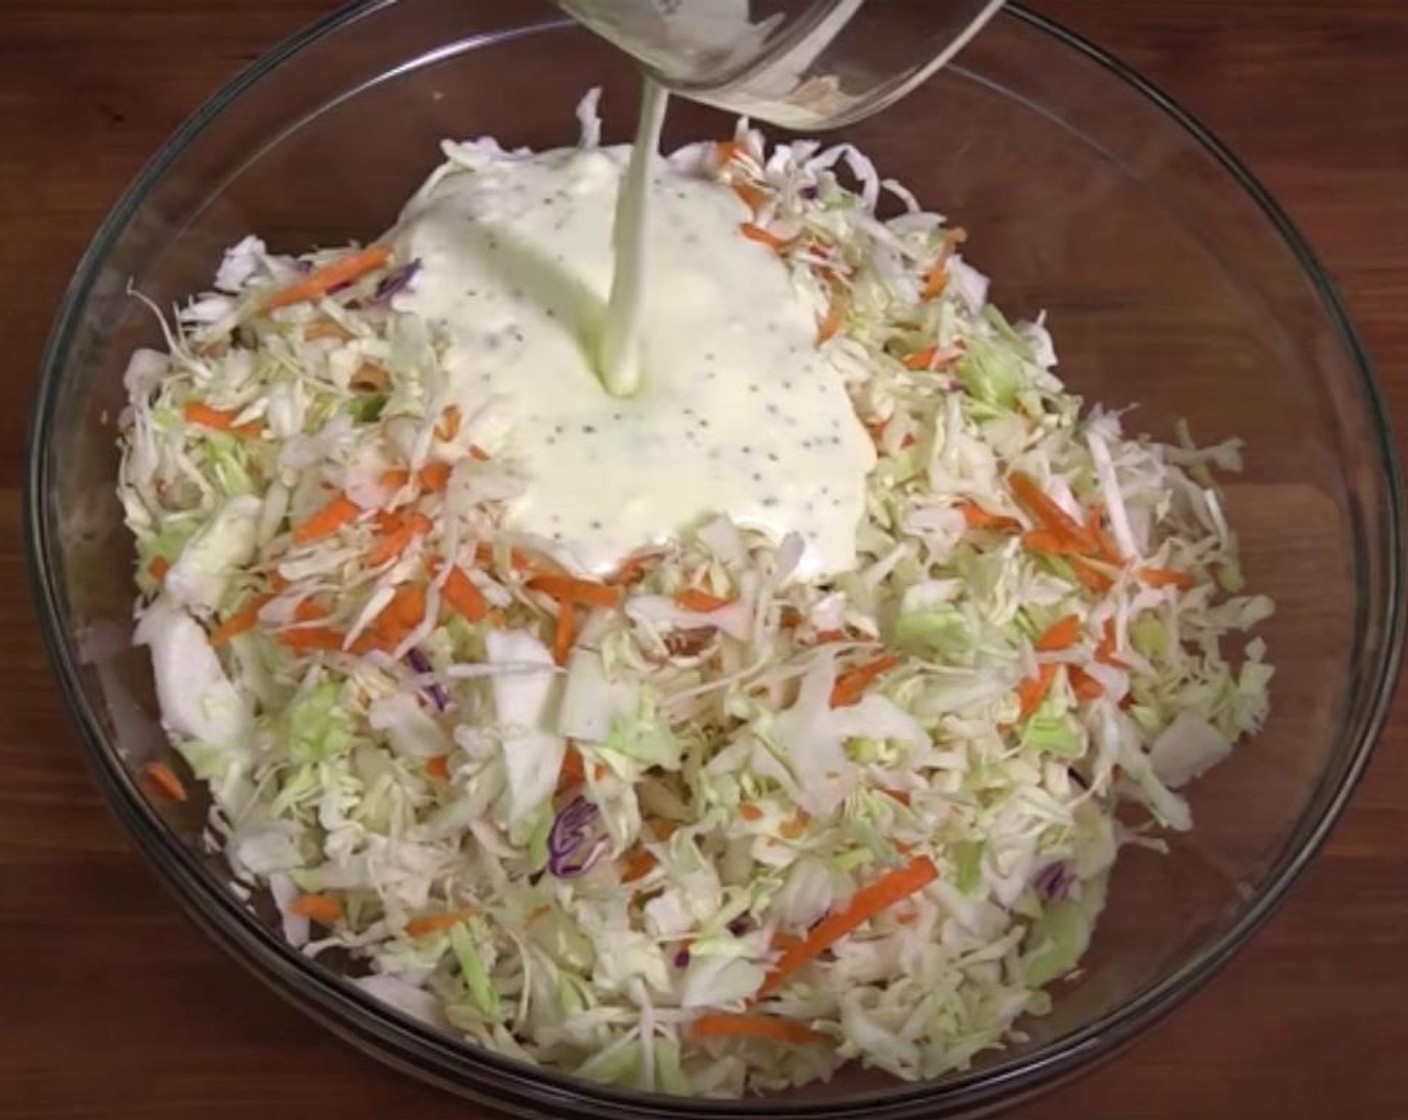 step 1 Make the coleslaw. Mix the Coleslaw Mix (2 cups), Mayonnaise (1/2 cup), Sour Cream (1/4 cup), Distilled White Vinegar (2 Tbsp), Granulated Sugar (1/4 cup) and Celery Seeds (1/2 tsp). Add Salt (to taste) and Ground Black Pepper (to taste). Refrigerate for an hour.